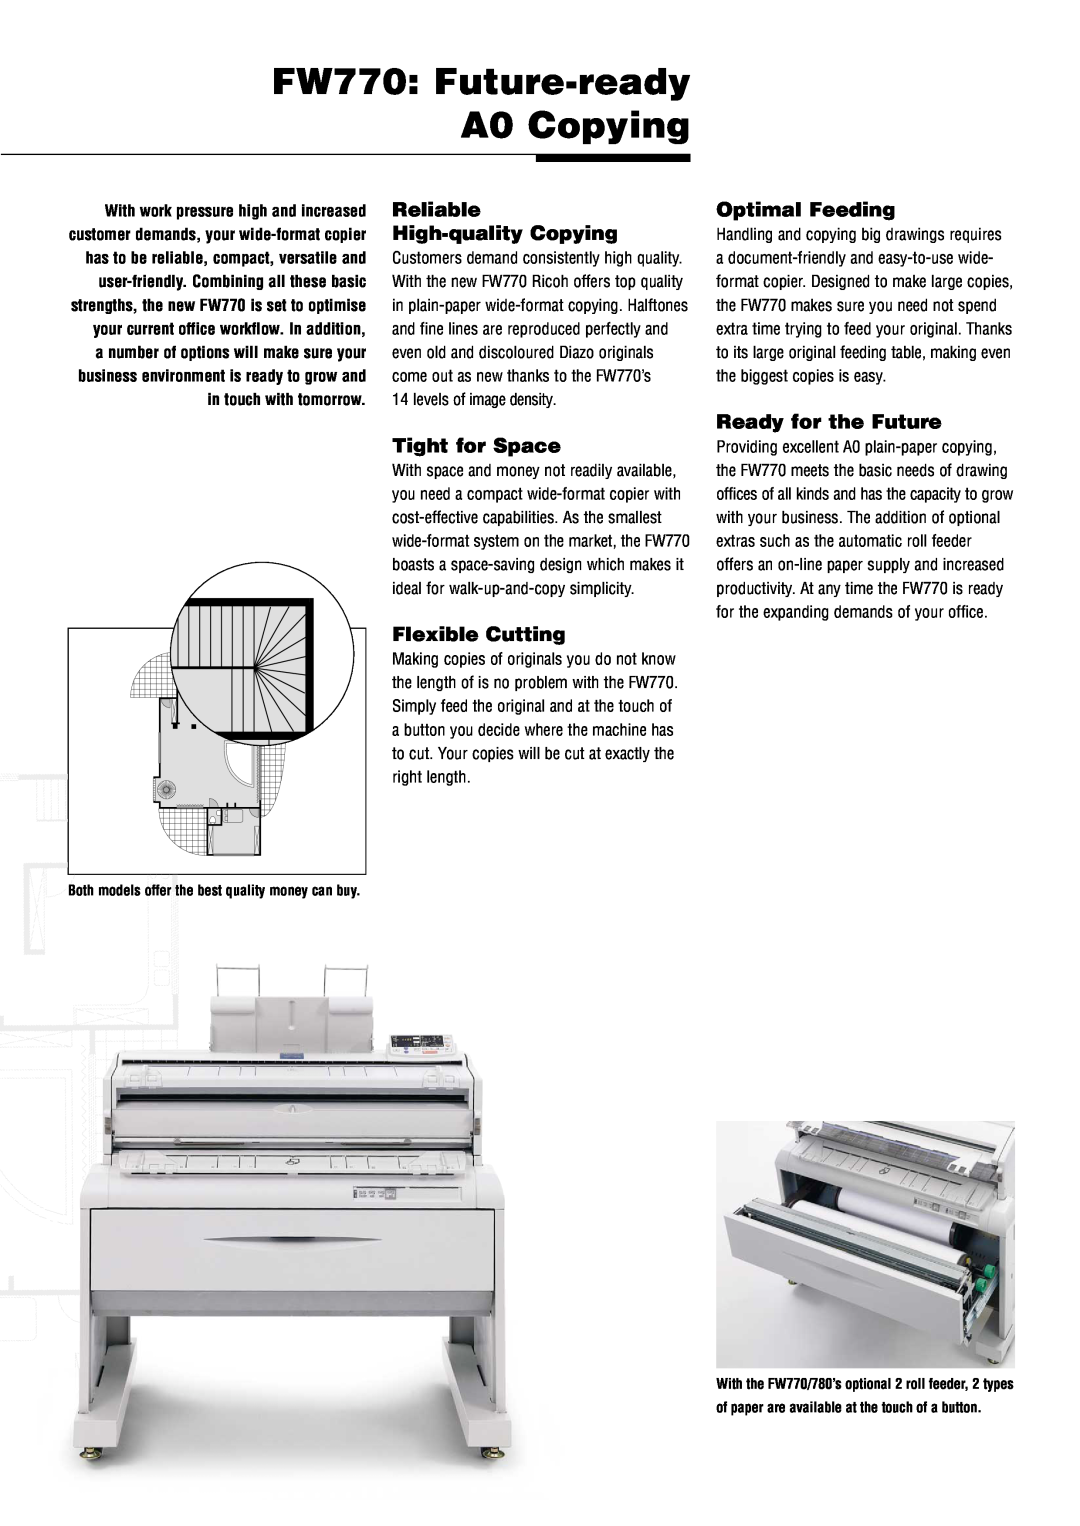 Ricoh FW770 Future-ready A0 Copying, Reliable, High-quality Copying, Tight for Space, Flexible Cutting, Optimal Feeding 